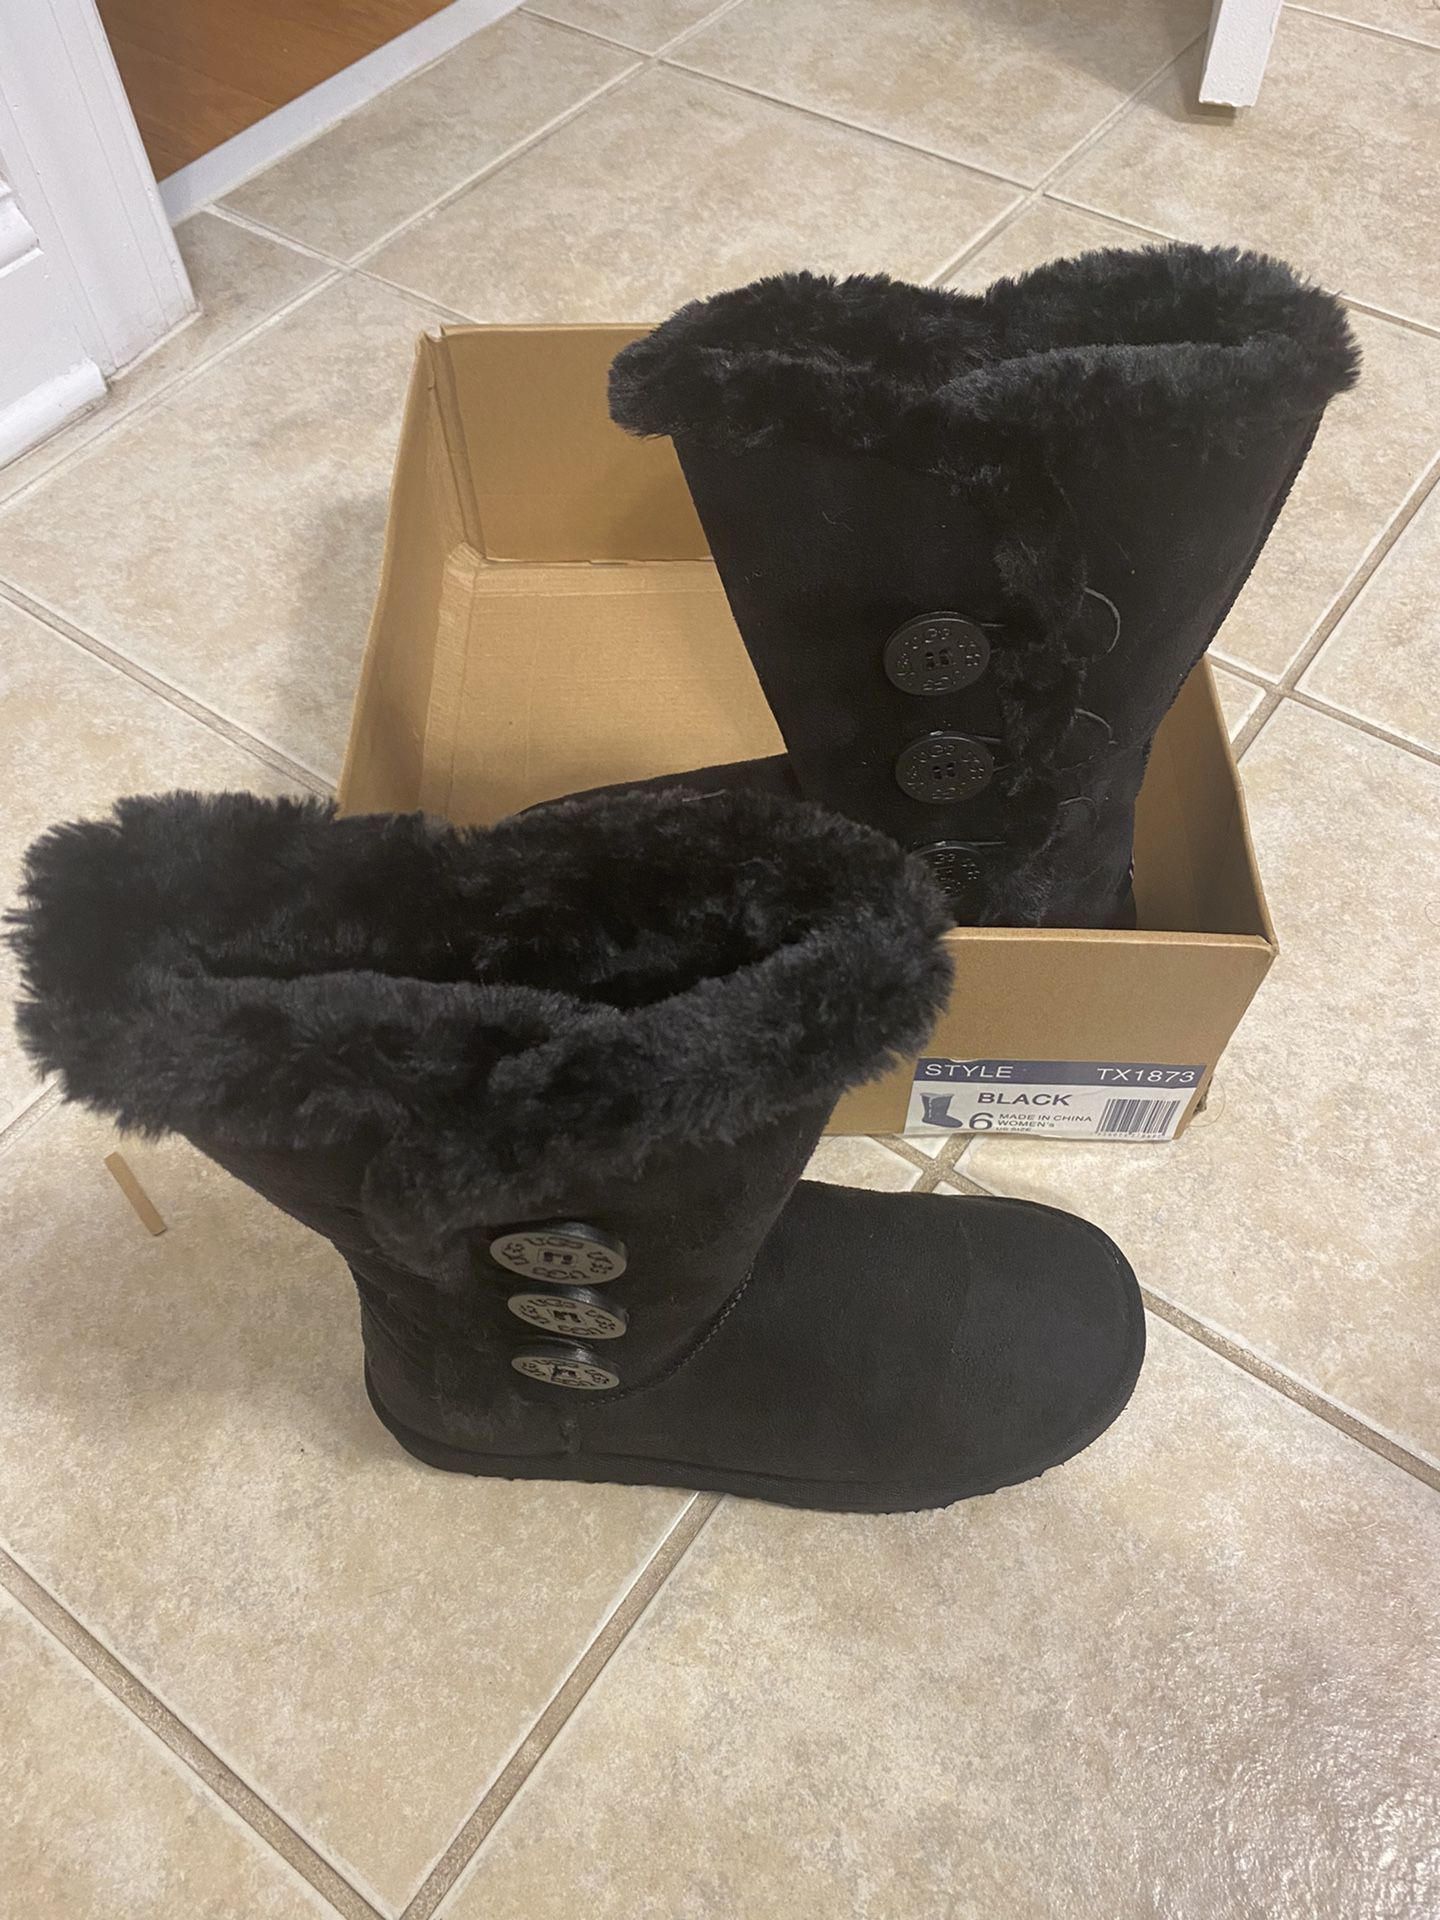 Brand New Black Ugg Boots Size 6 With A Box